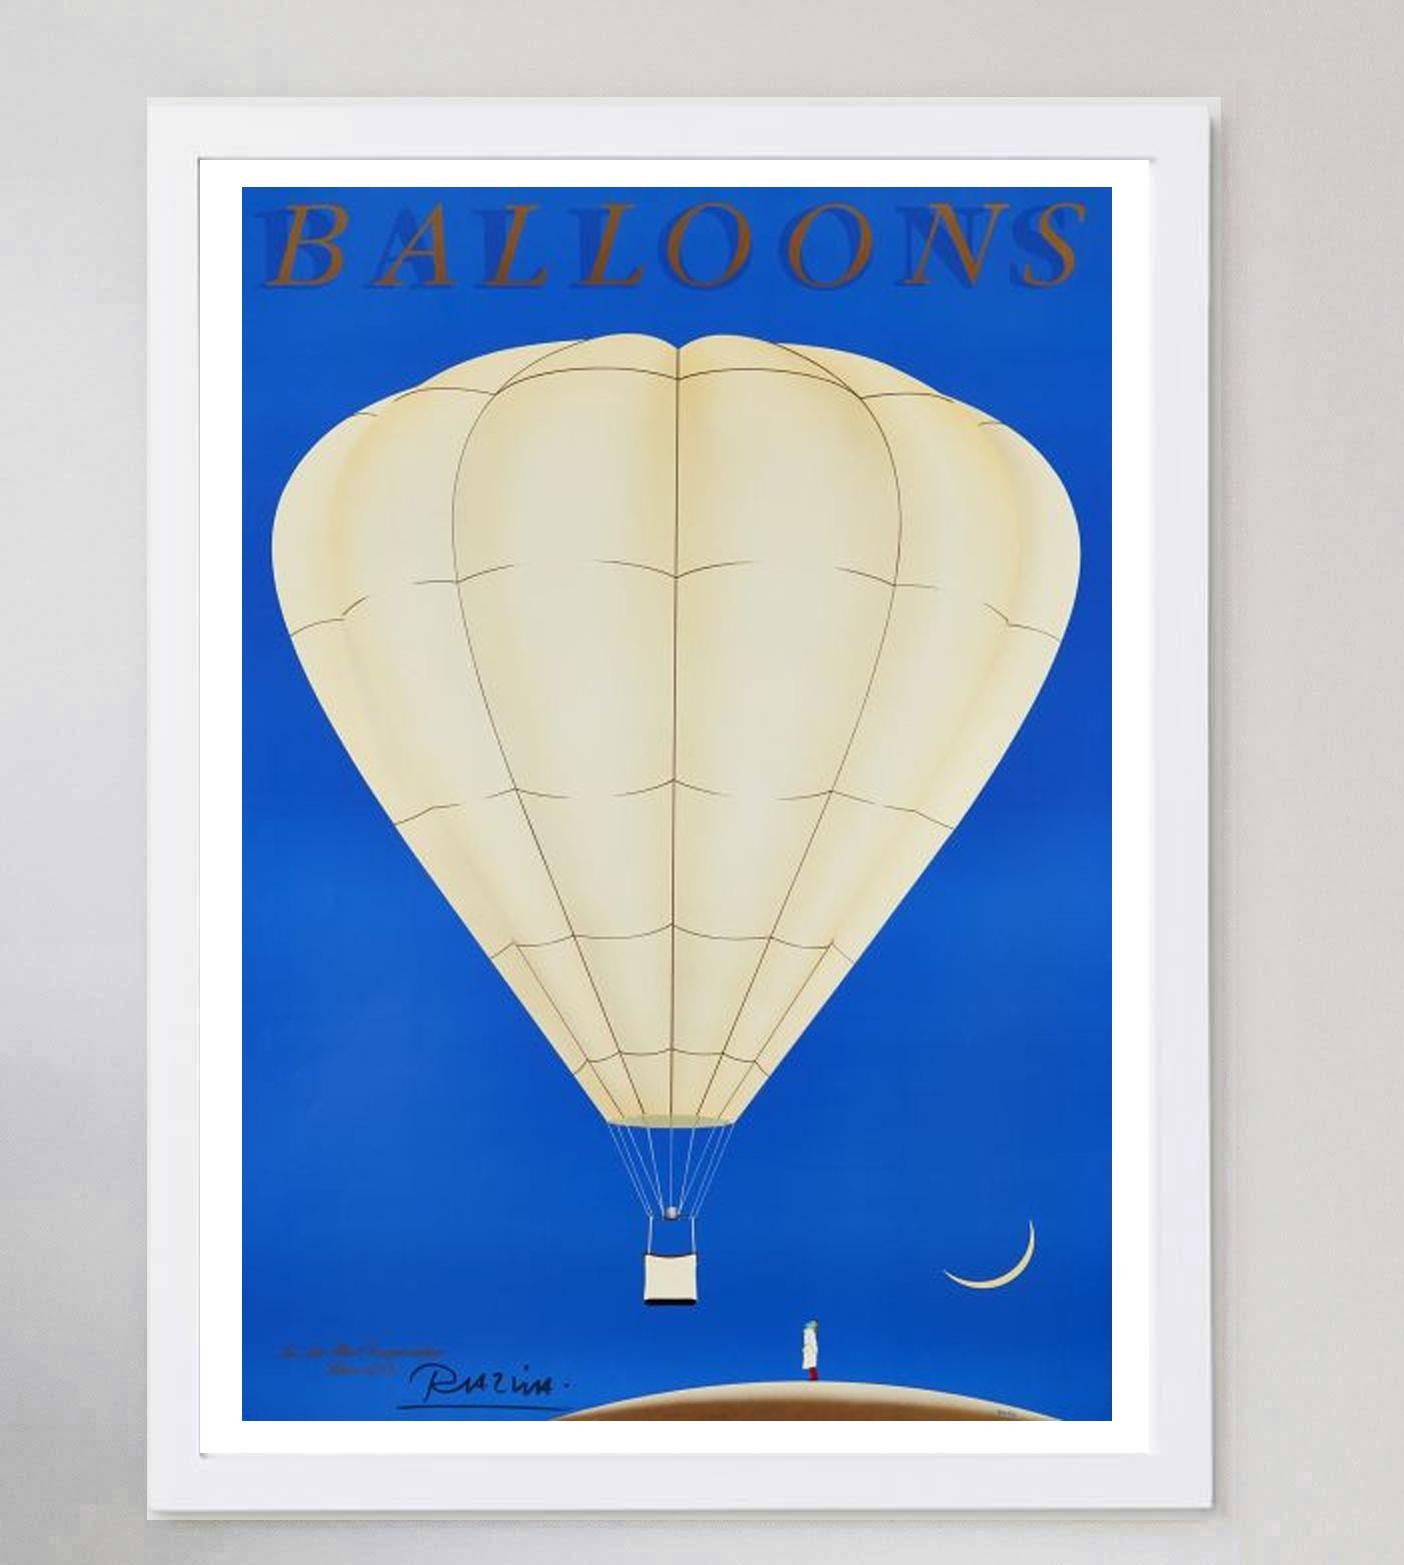 Late 20th Century 1985 Balloons - Razzia Original Vintage Poster For Sale